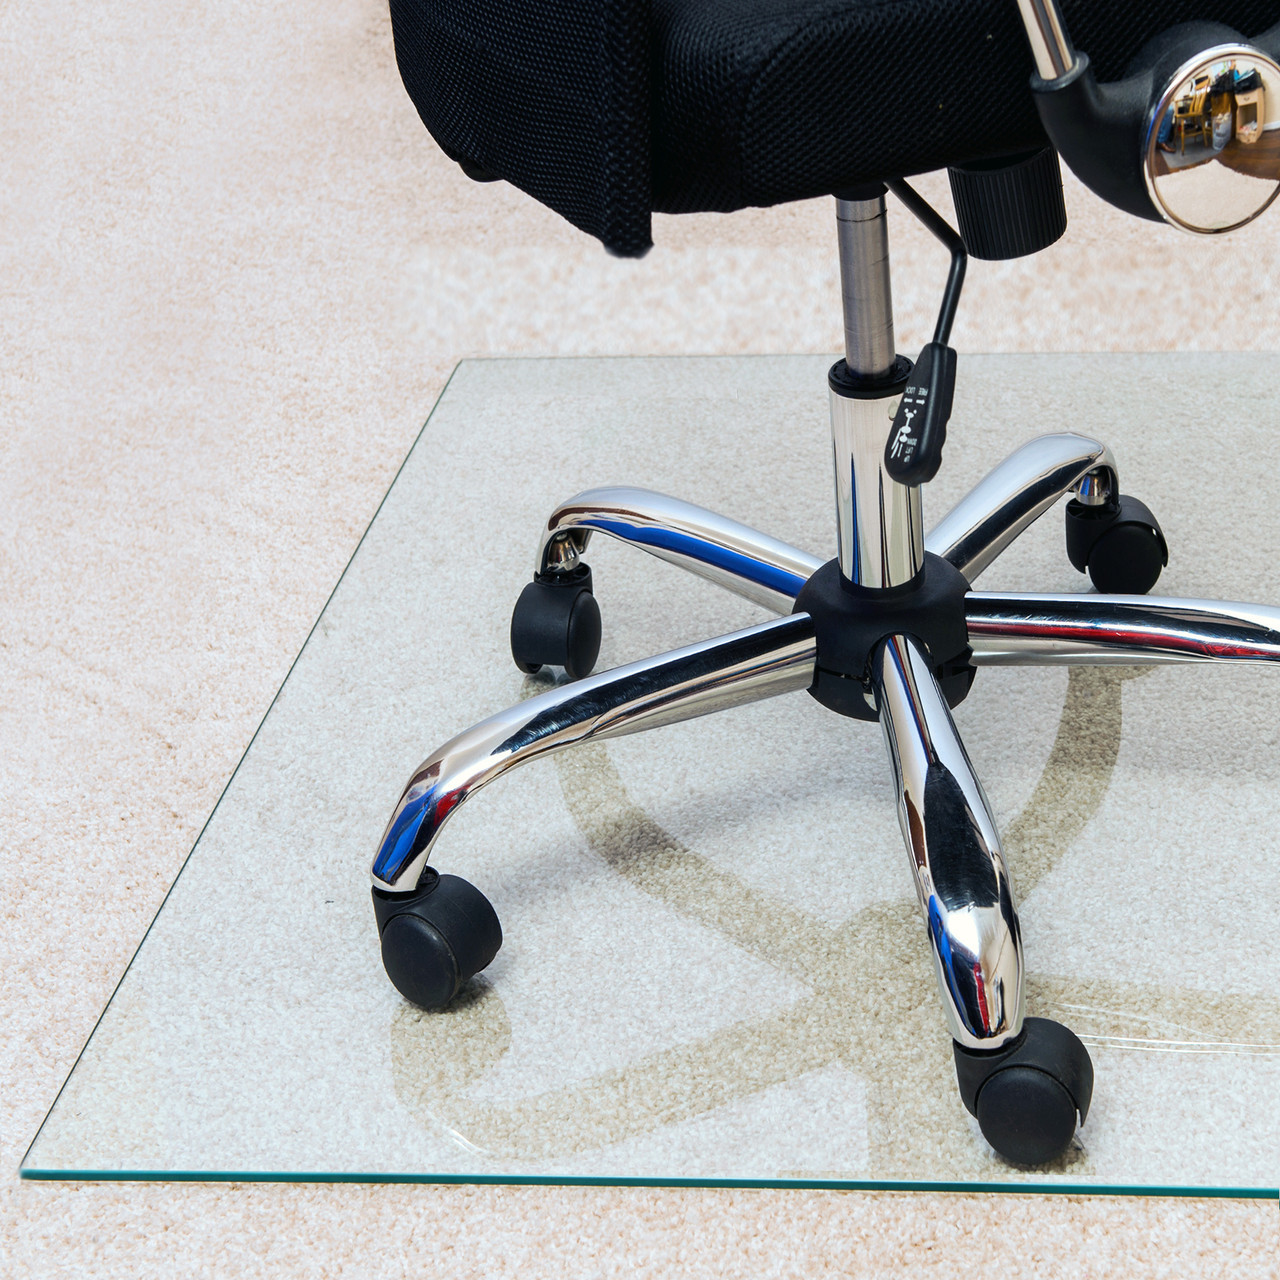 Cleartex Glaciermat Heavy Duty Glass Chair Mat for Hard Floors and